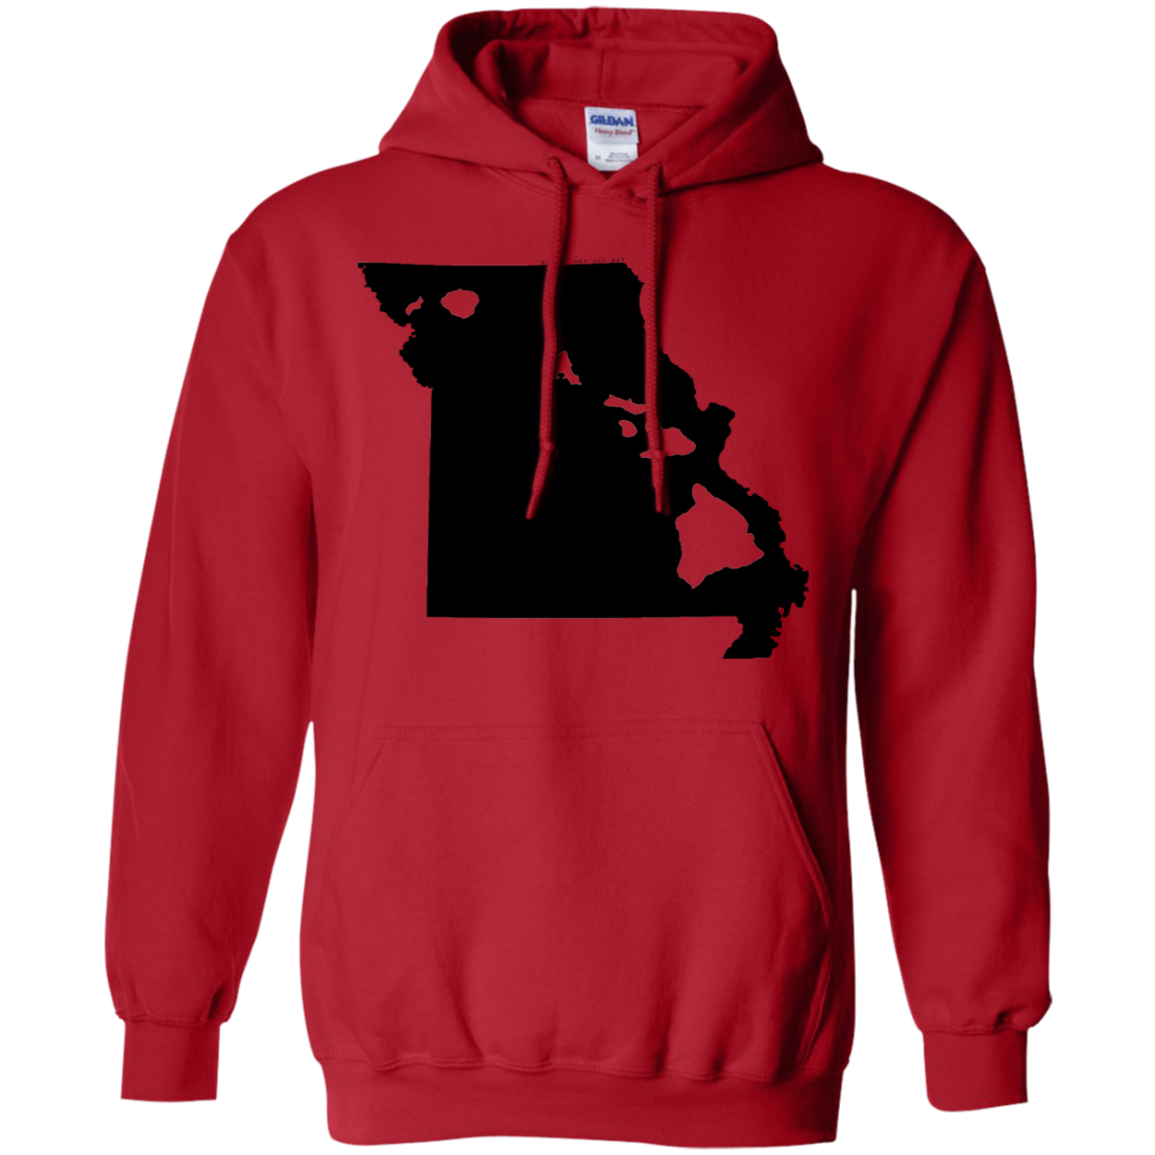 Living in Missouri with Hawaii Roots Pullover Hoodie 8 oz., Sweatshirts, Hawaii Nei All Day